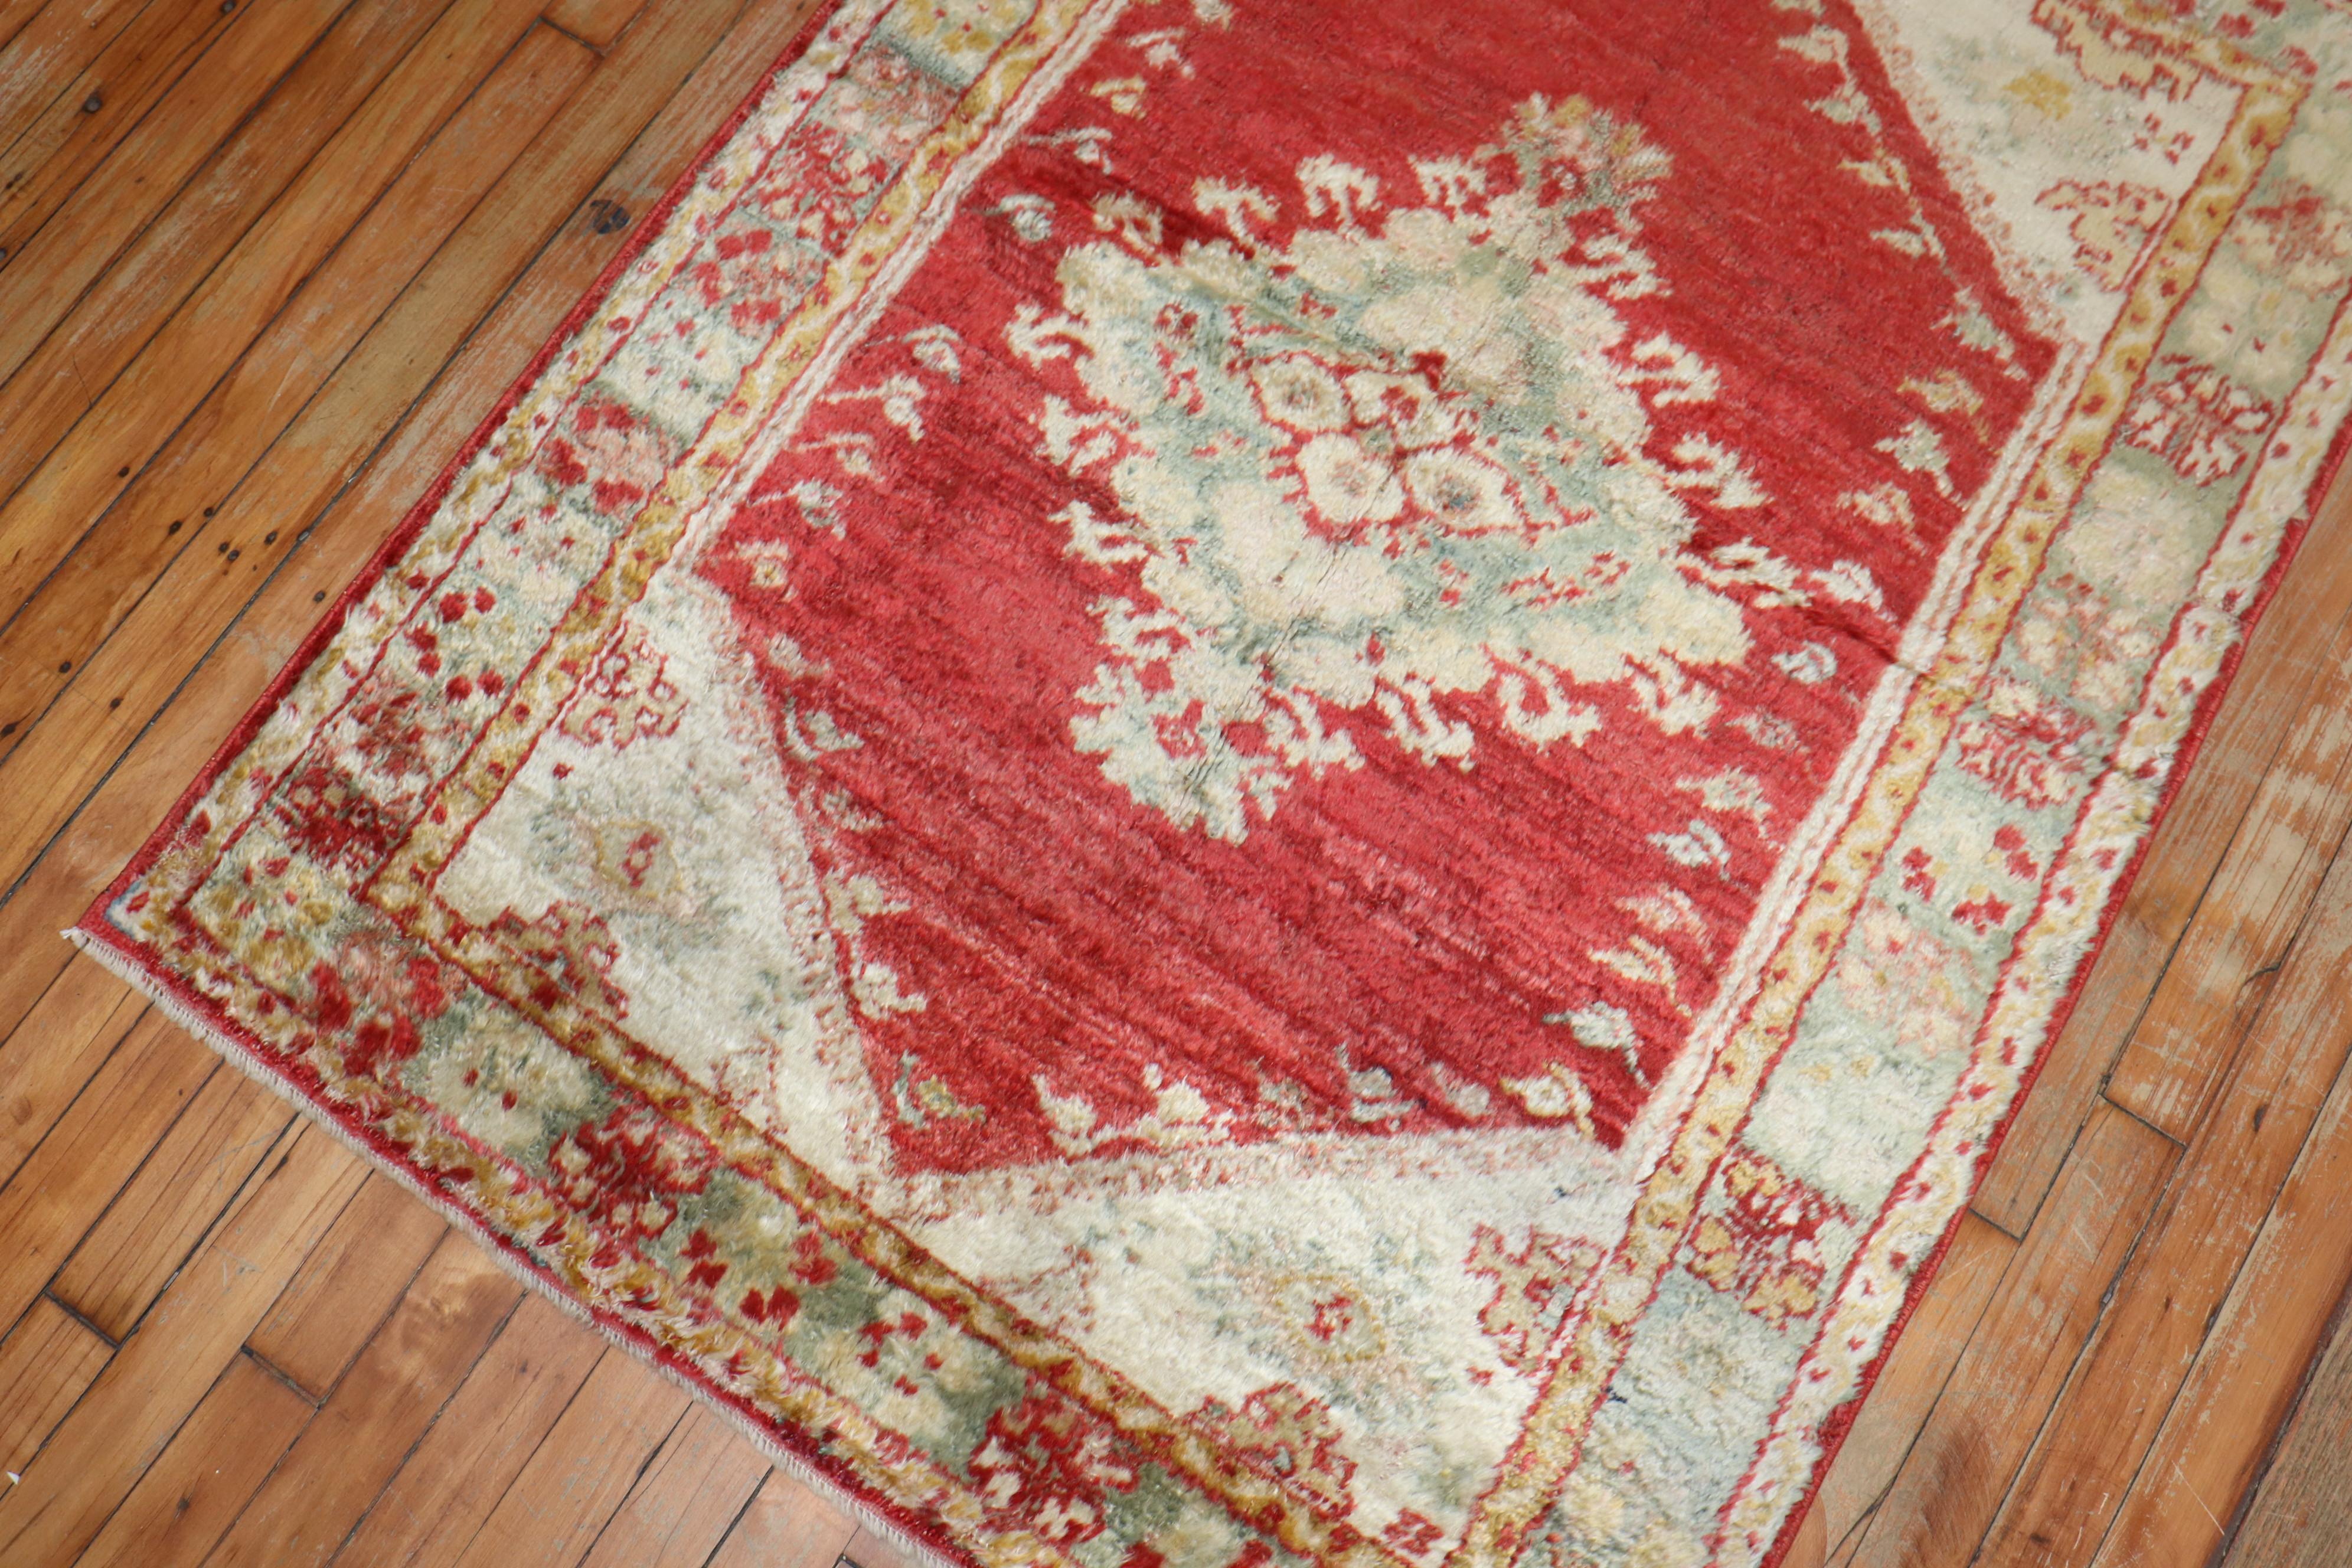 Circa 1900 authentic Angora Wool Excellent Condition Turkish Oushak Rug with a geometric design 

Measures: 3'4'' x 4'6''

Oushak rugs are prized for their rich looks as well as for their high quality and exceptional beauty, which makes them